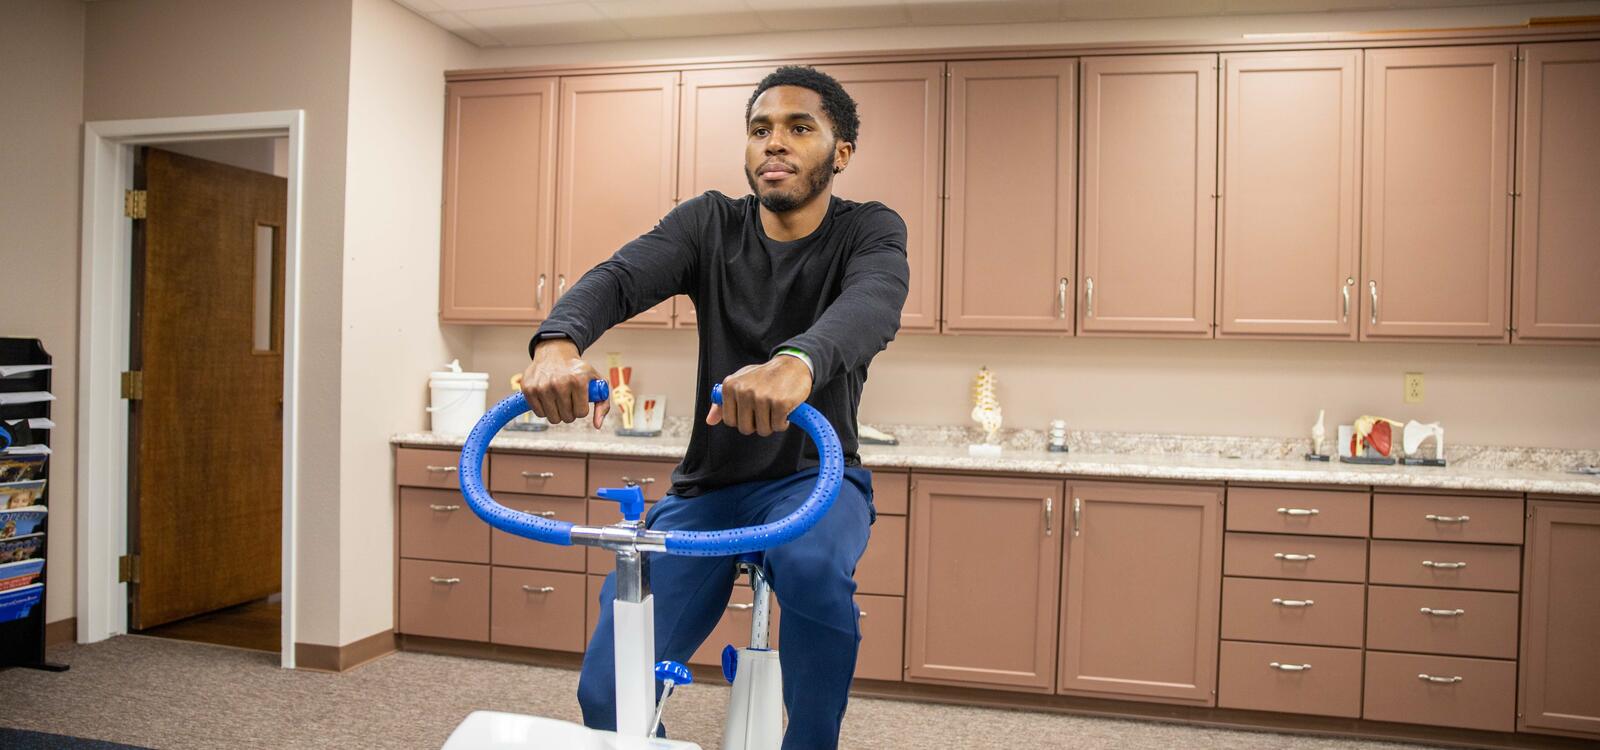 Student using exercise machine in kinesiology building.